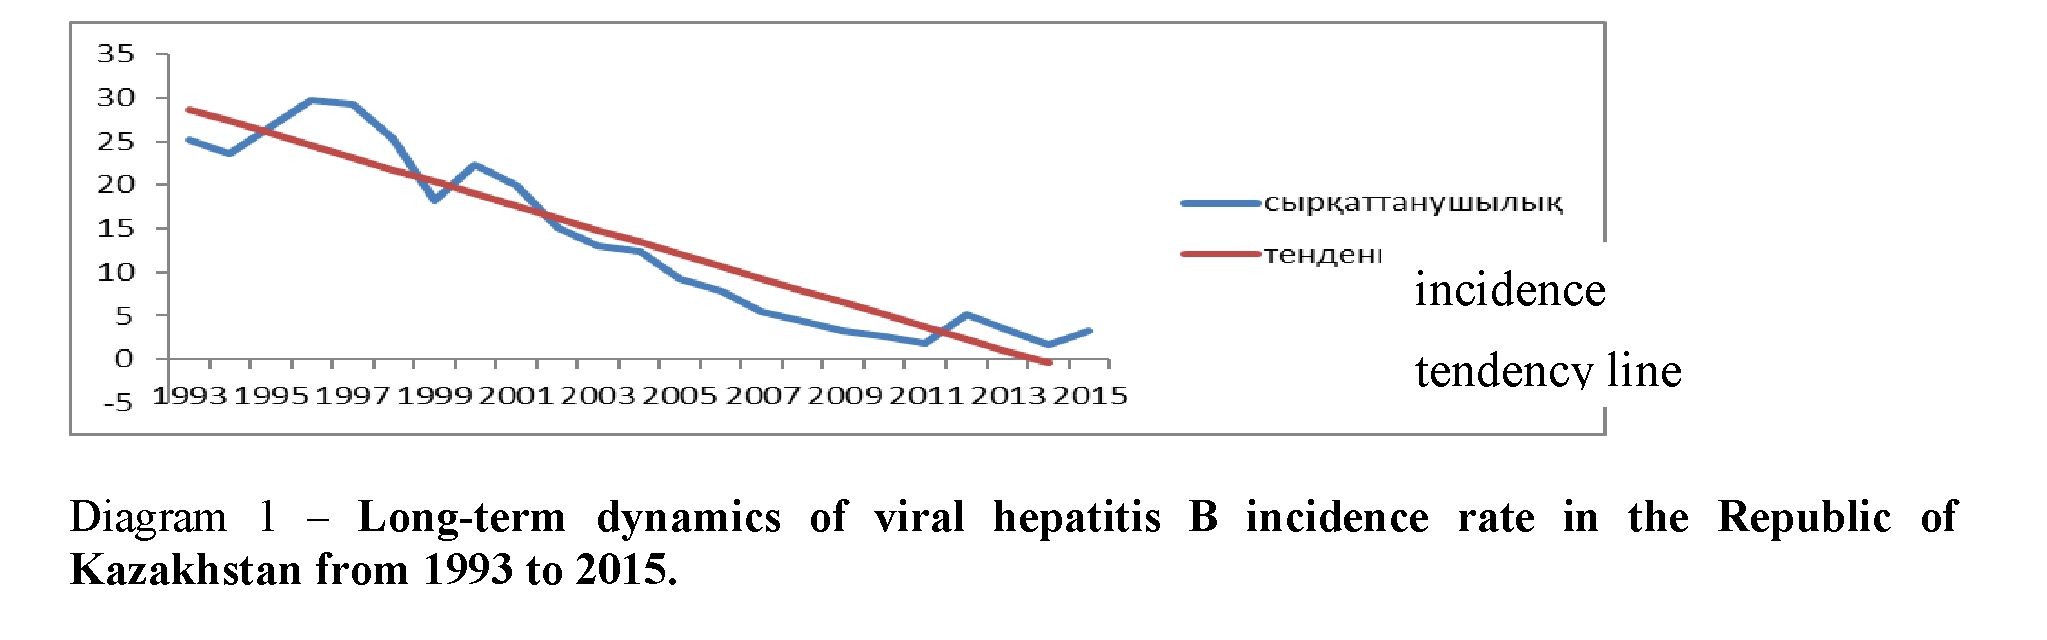 Epidemiological post evaluation of incidence rate of viral hepatitis b in the republic of kazakhstan